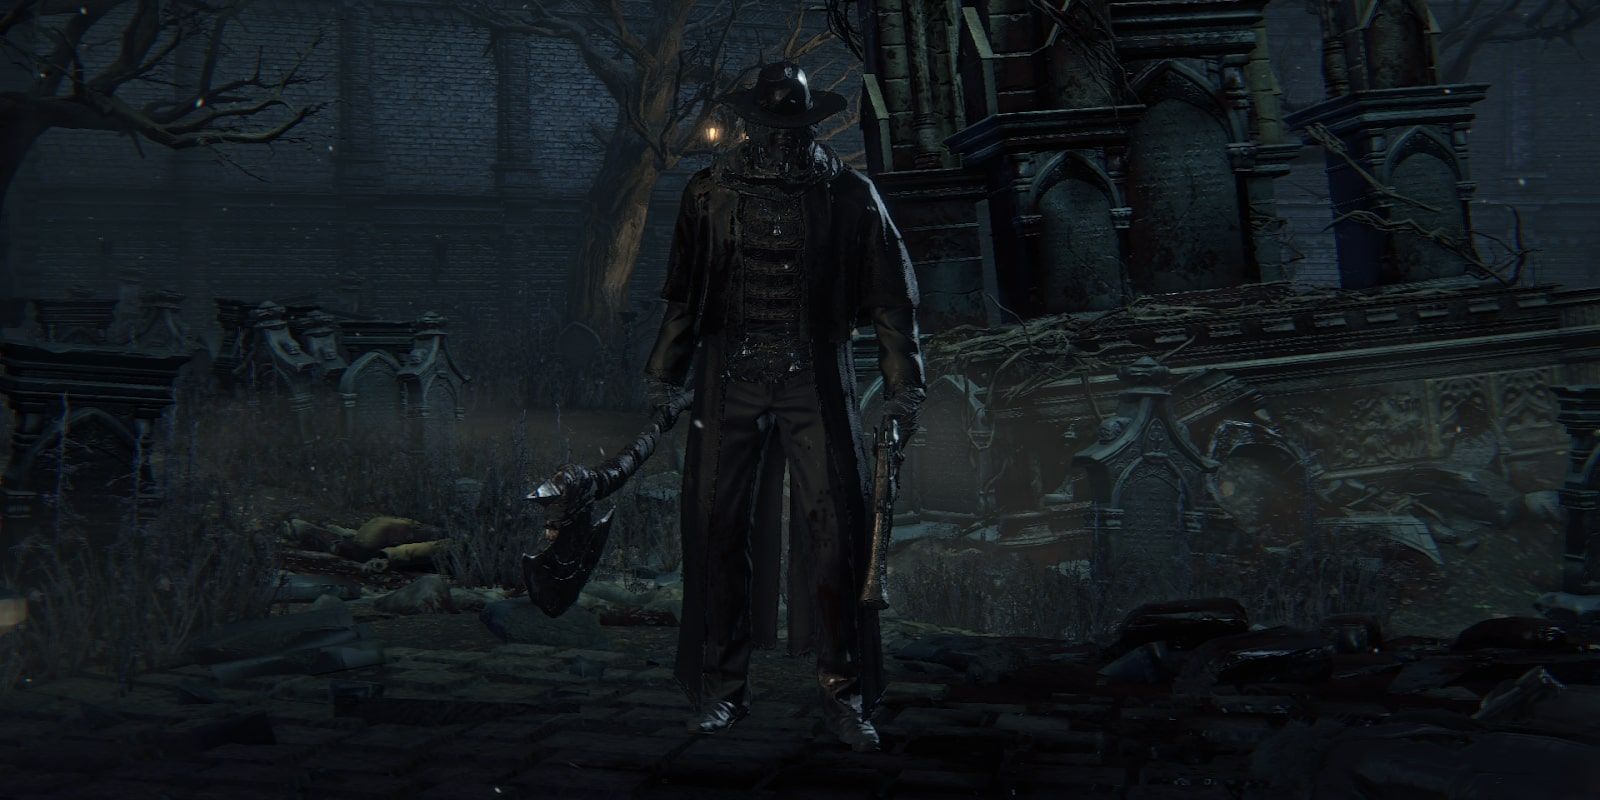 Father Gascoigne about to fight you in Bloodborne